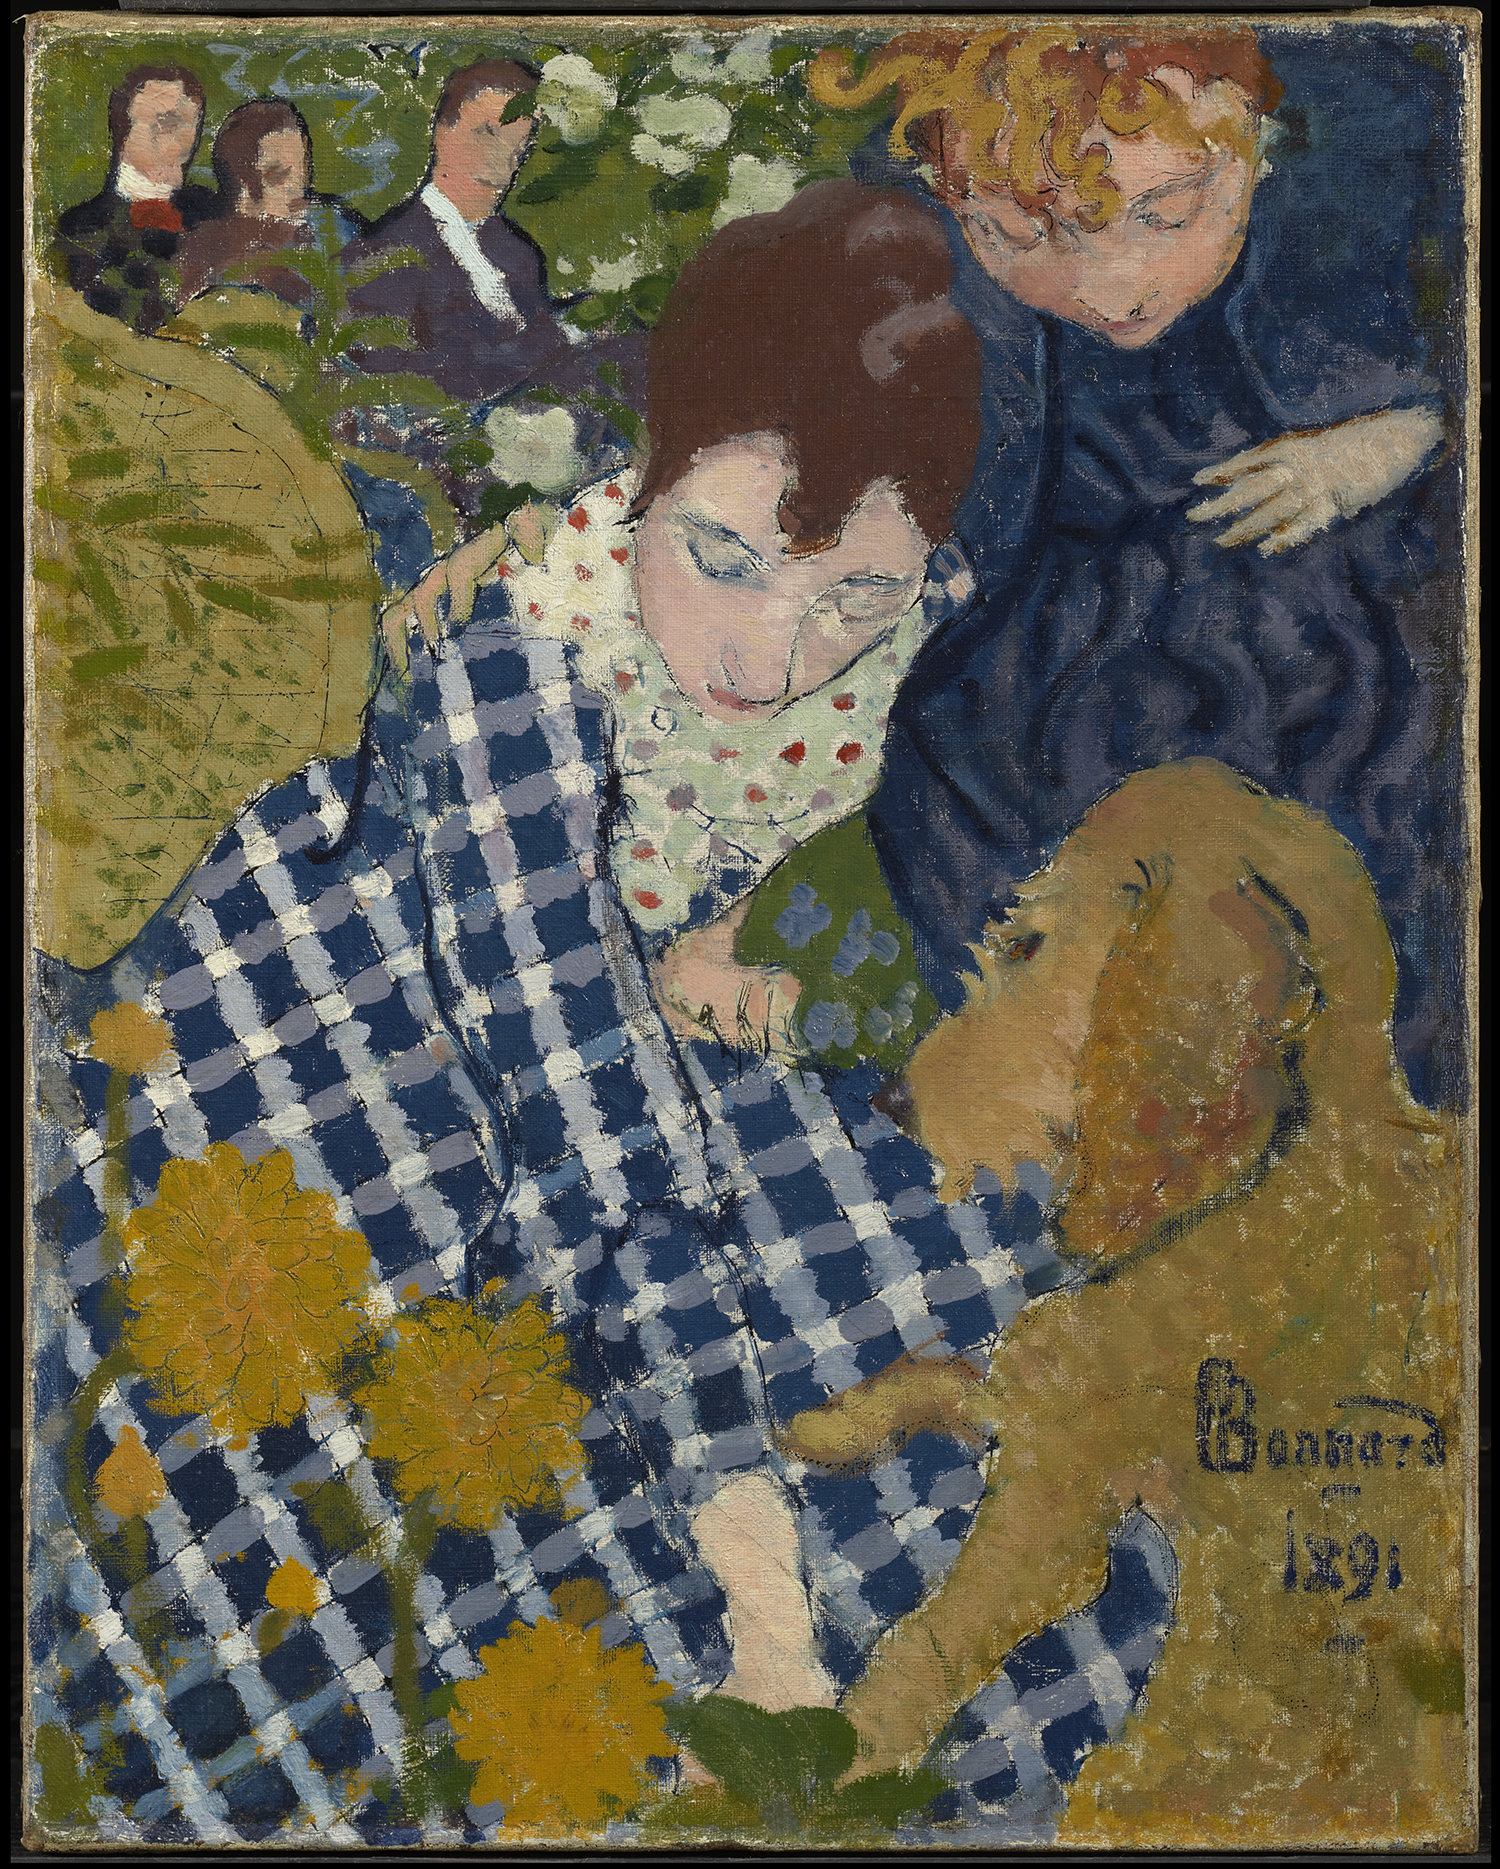 "Women with a Dog," 1891, by Pierre Bonnard,'' will be part of the Cleveland Museum of Art's upcoming show on the French Nabis school of painters. The Clark Art Institute, © 2021 Artists Rights Society (ARS), New York / ADAGP, Paris